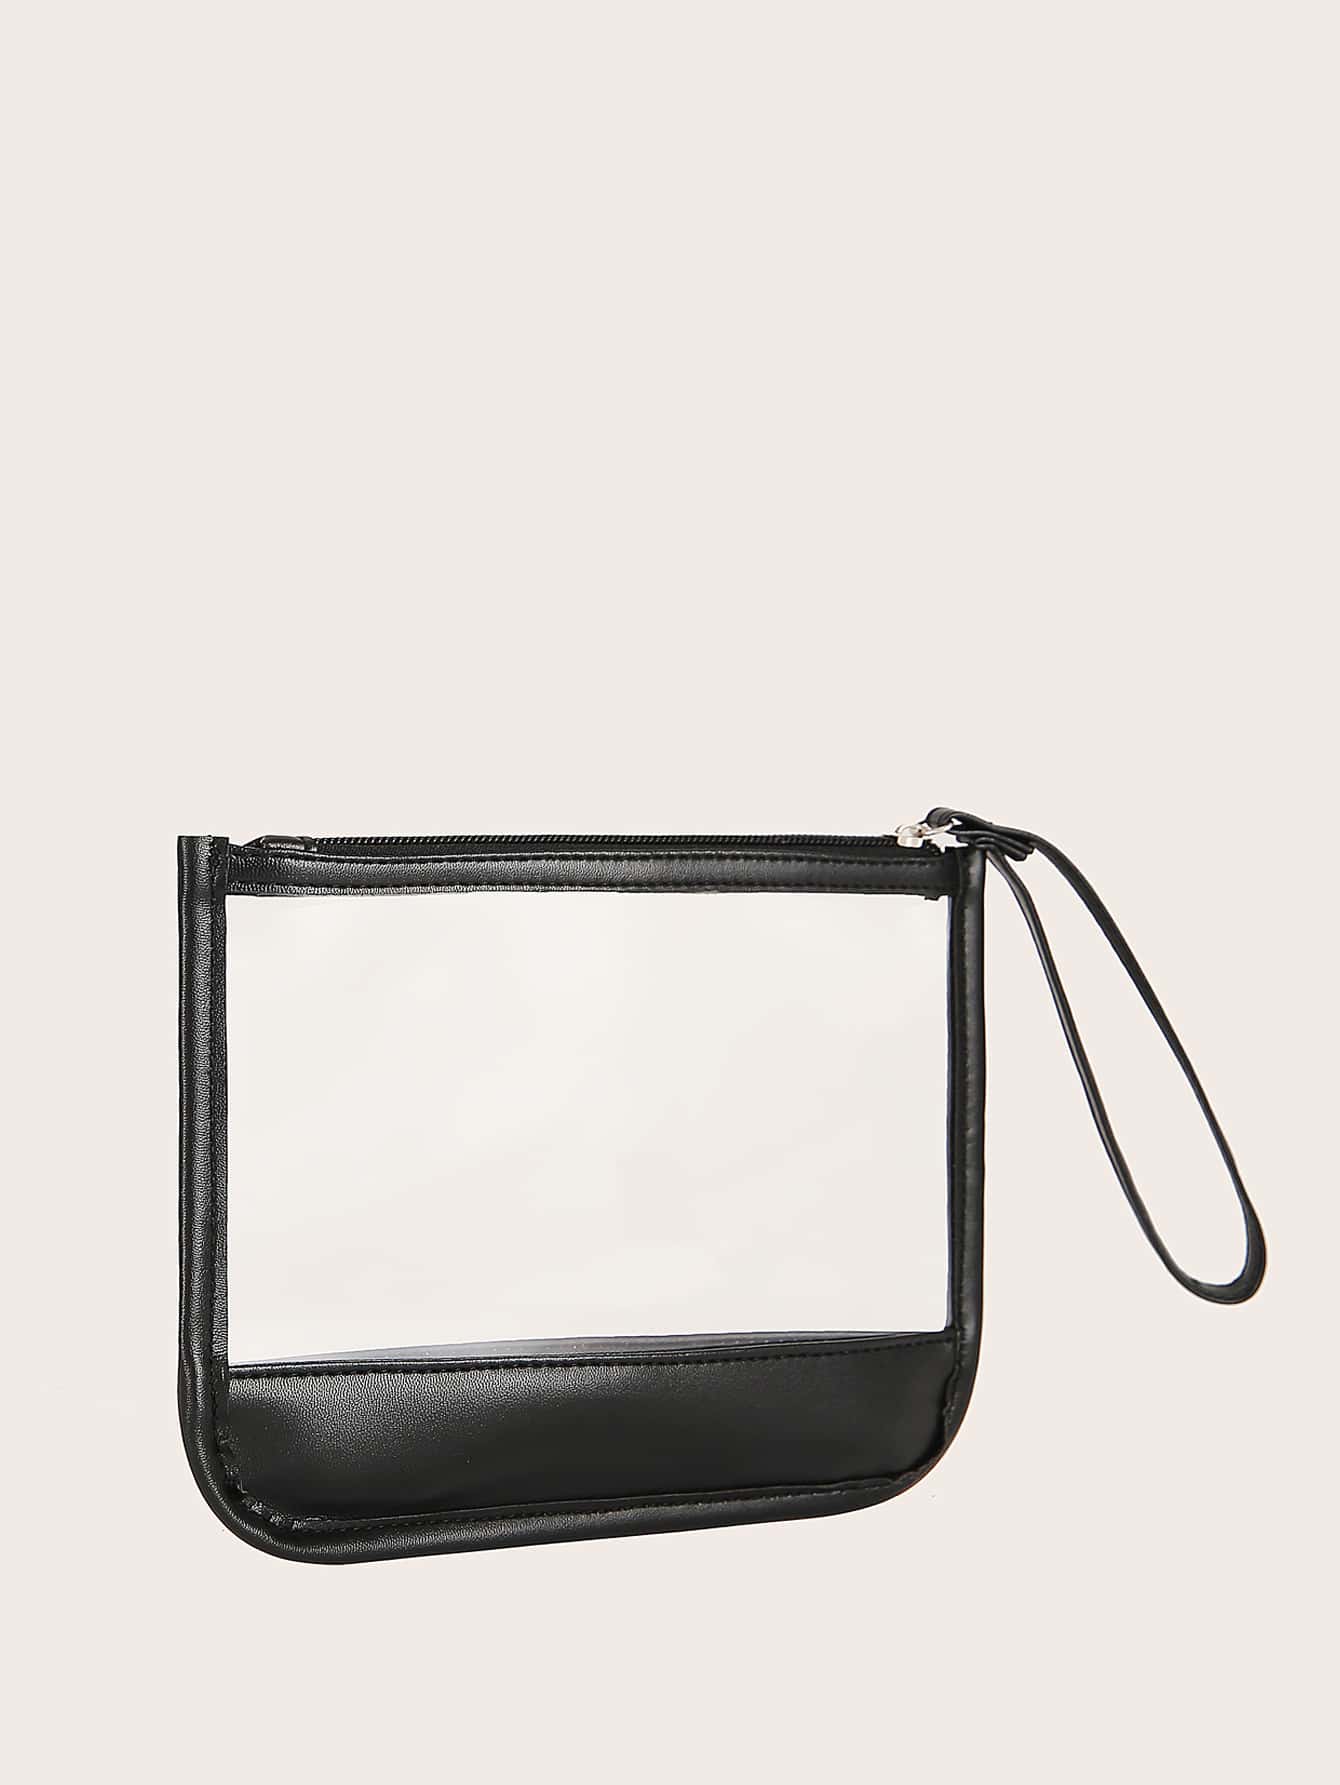 Clear Clutch Bag With Wristlet